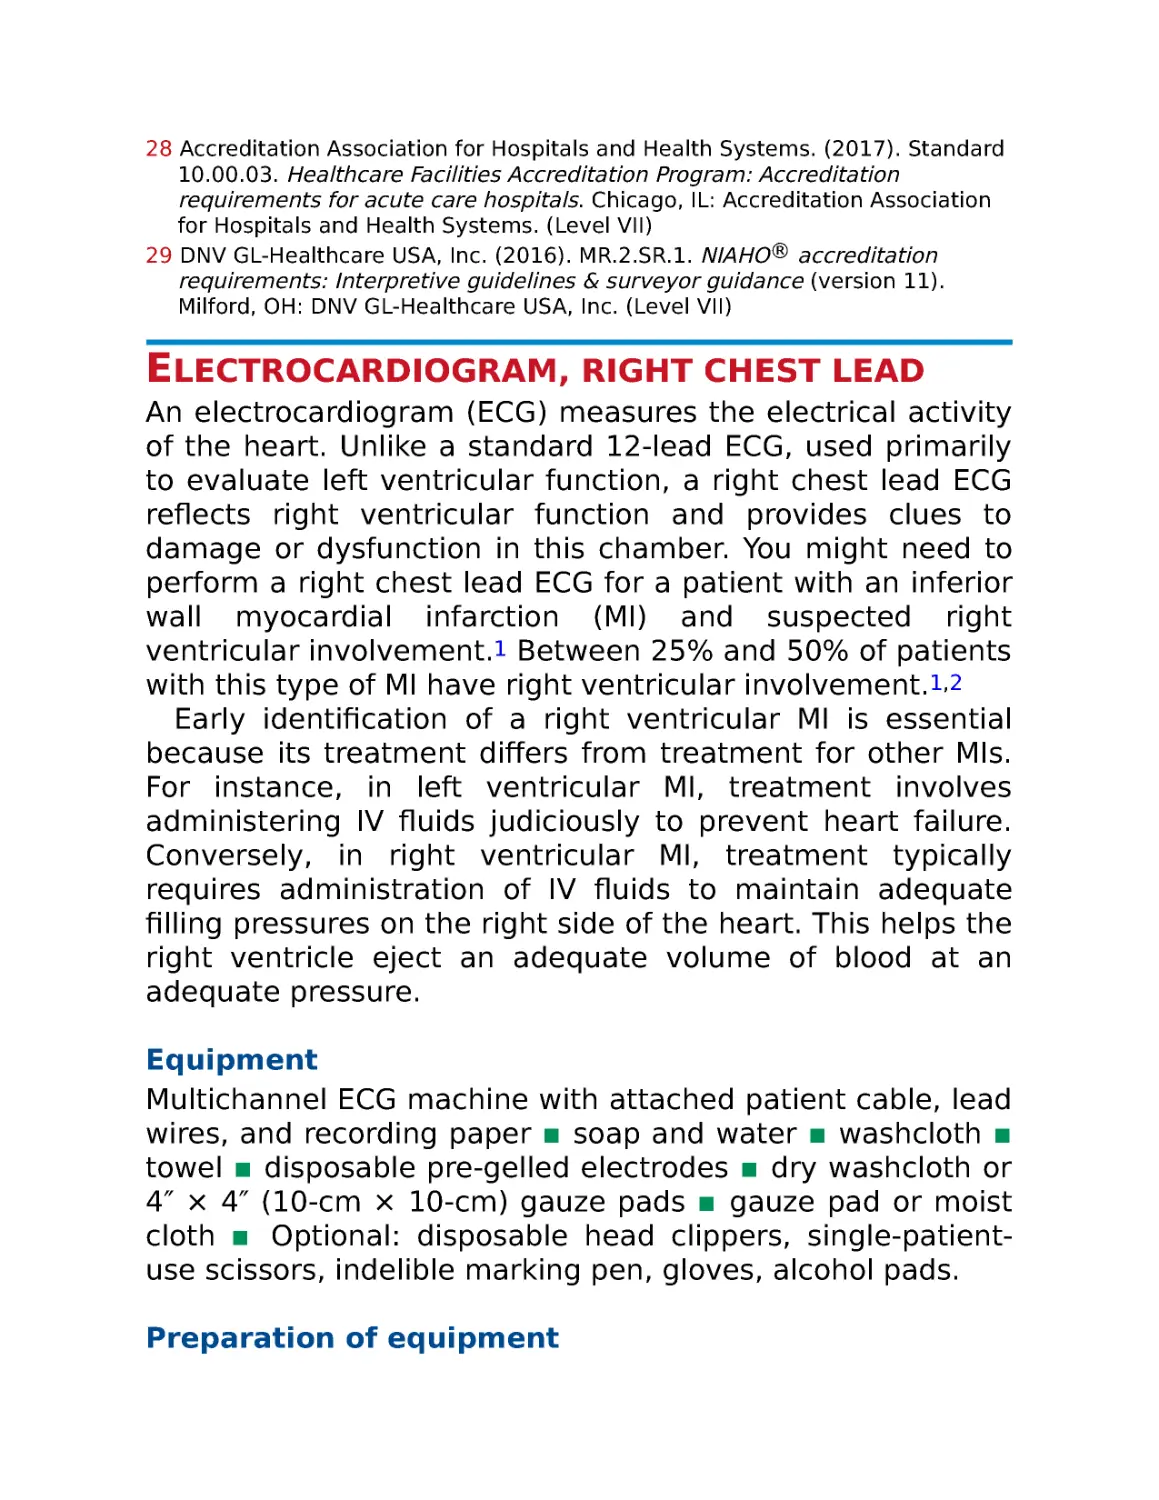 Electrocardiogram, right chest lead